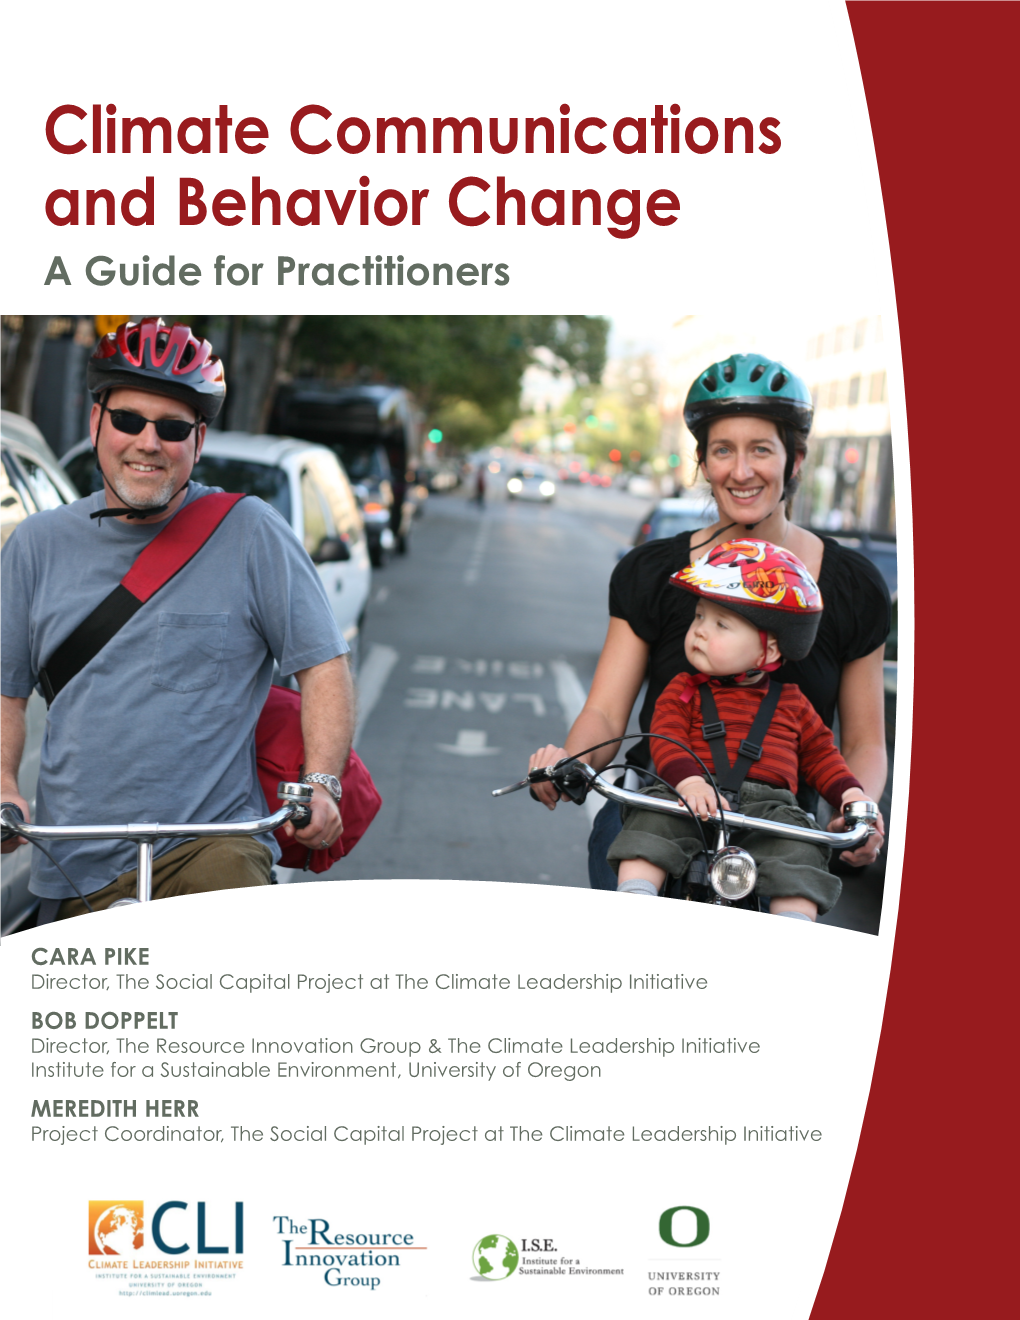 Climate Communications and Behavior Change a Guide for Practitioners